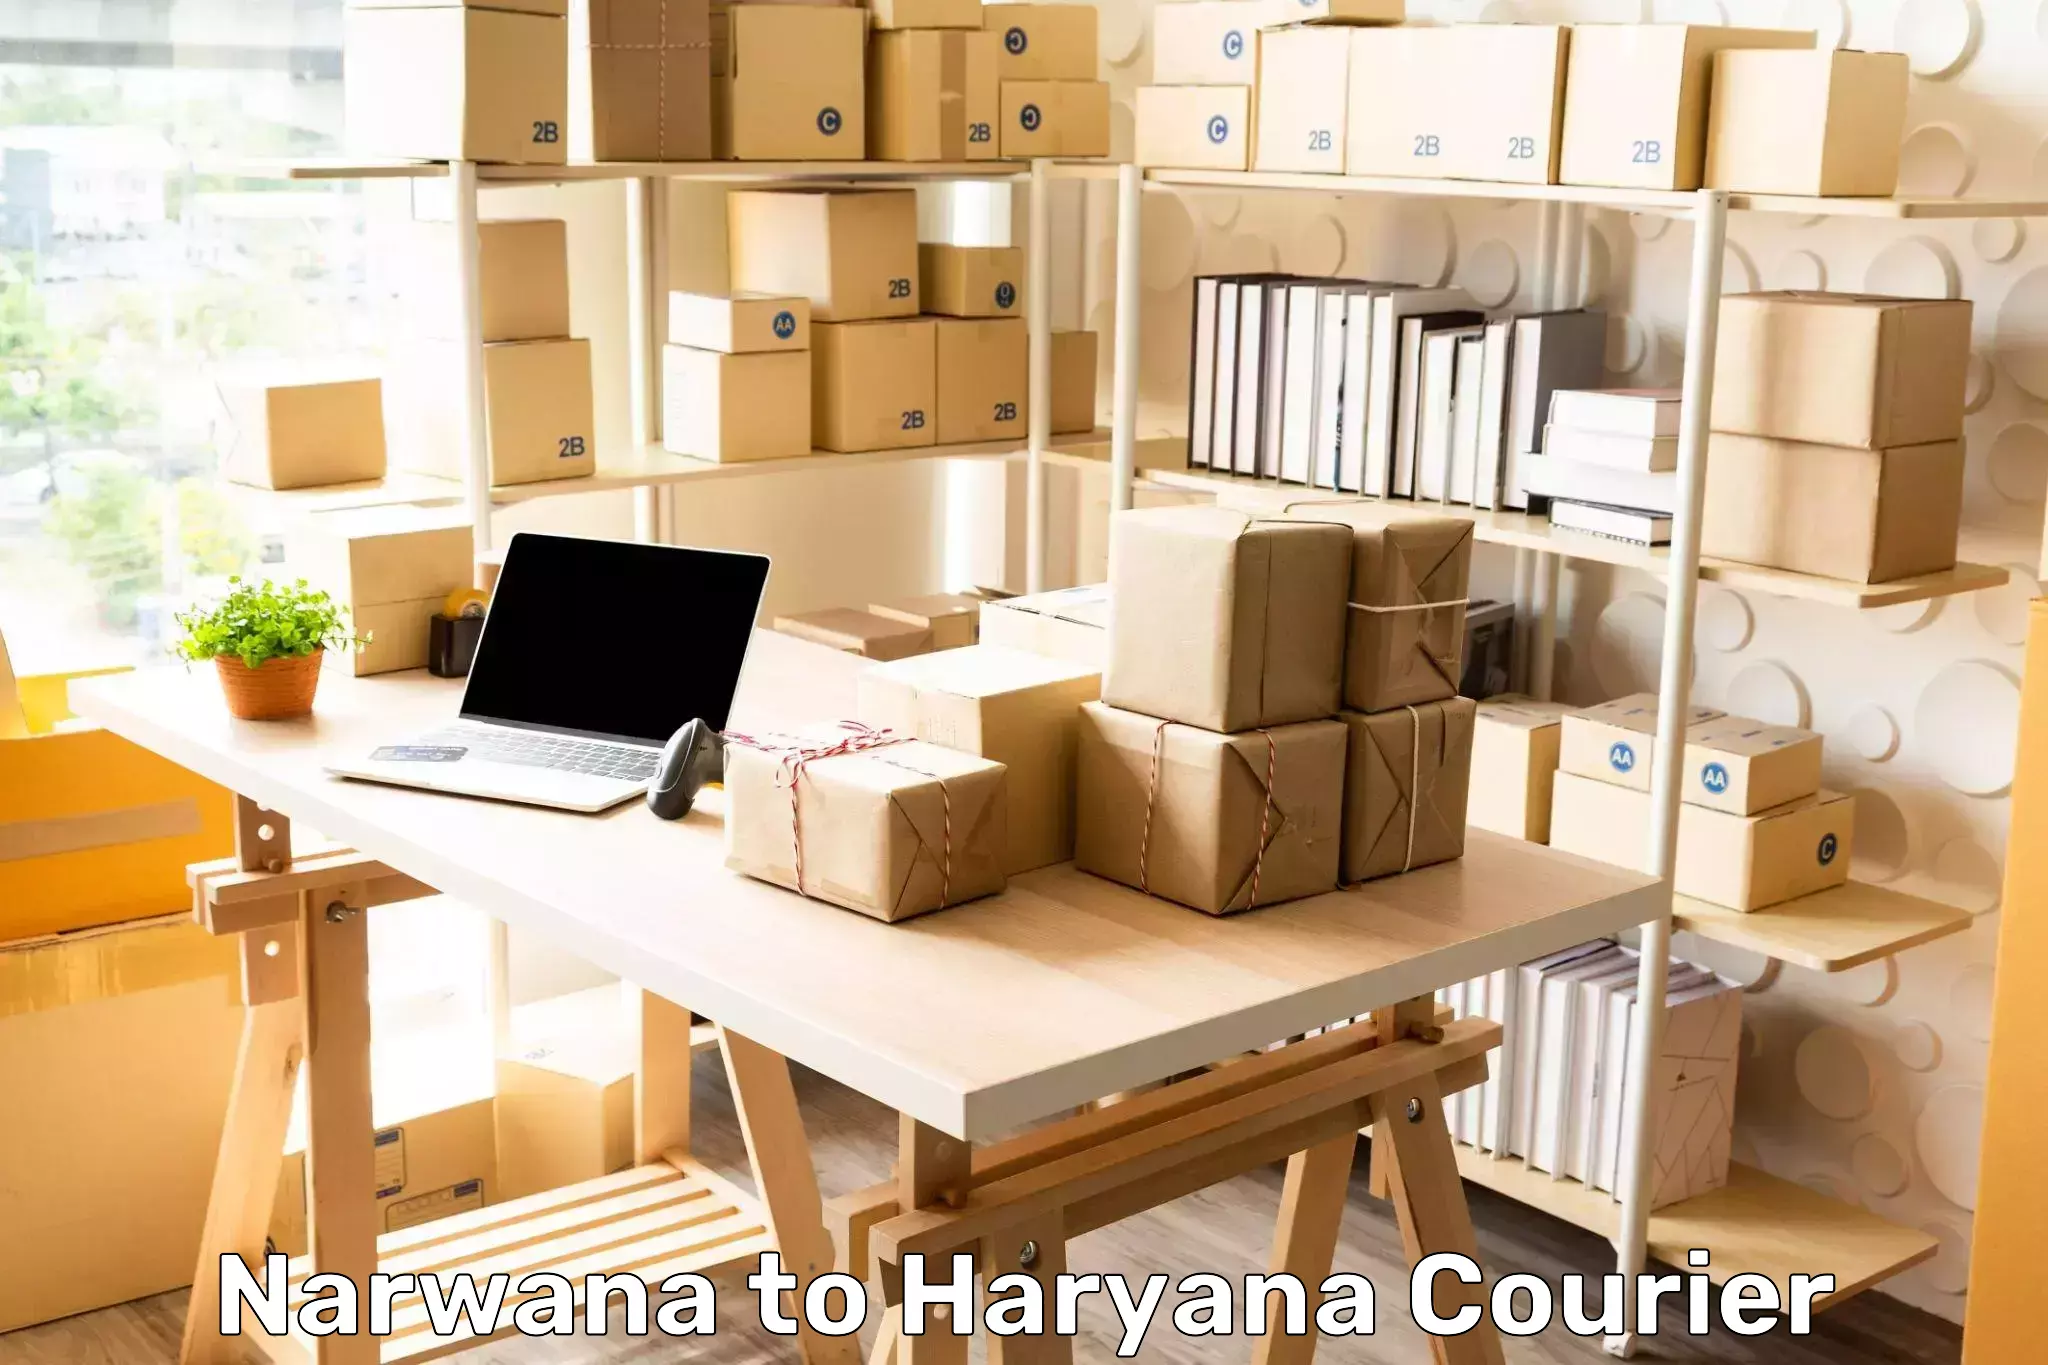 State-of-the-art courier technology Narwana to Hodal